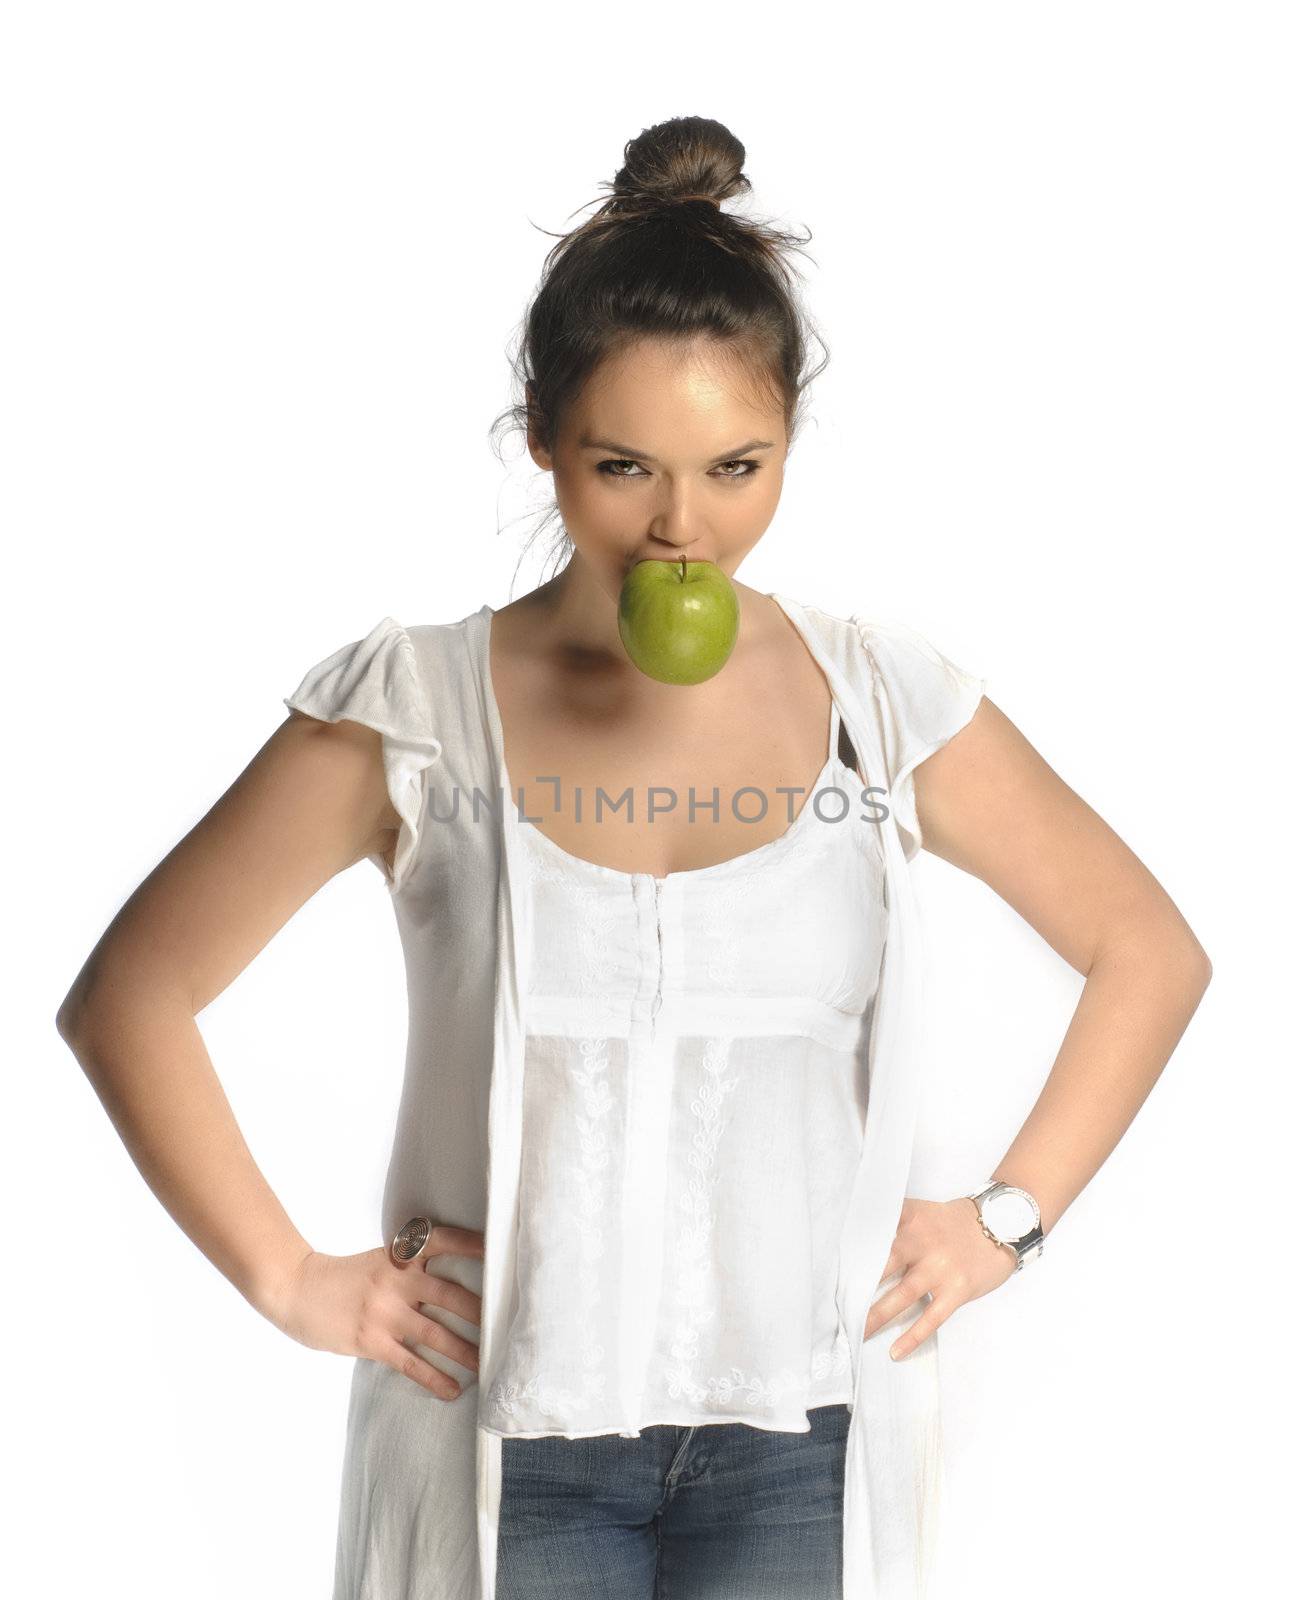 Beautiful young woman biting an apple portrait isolated on white